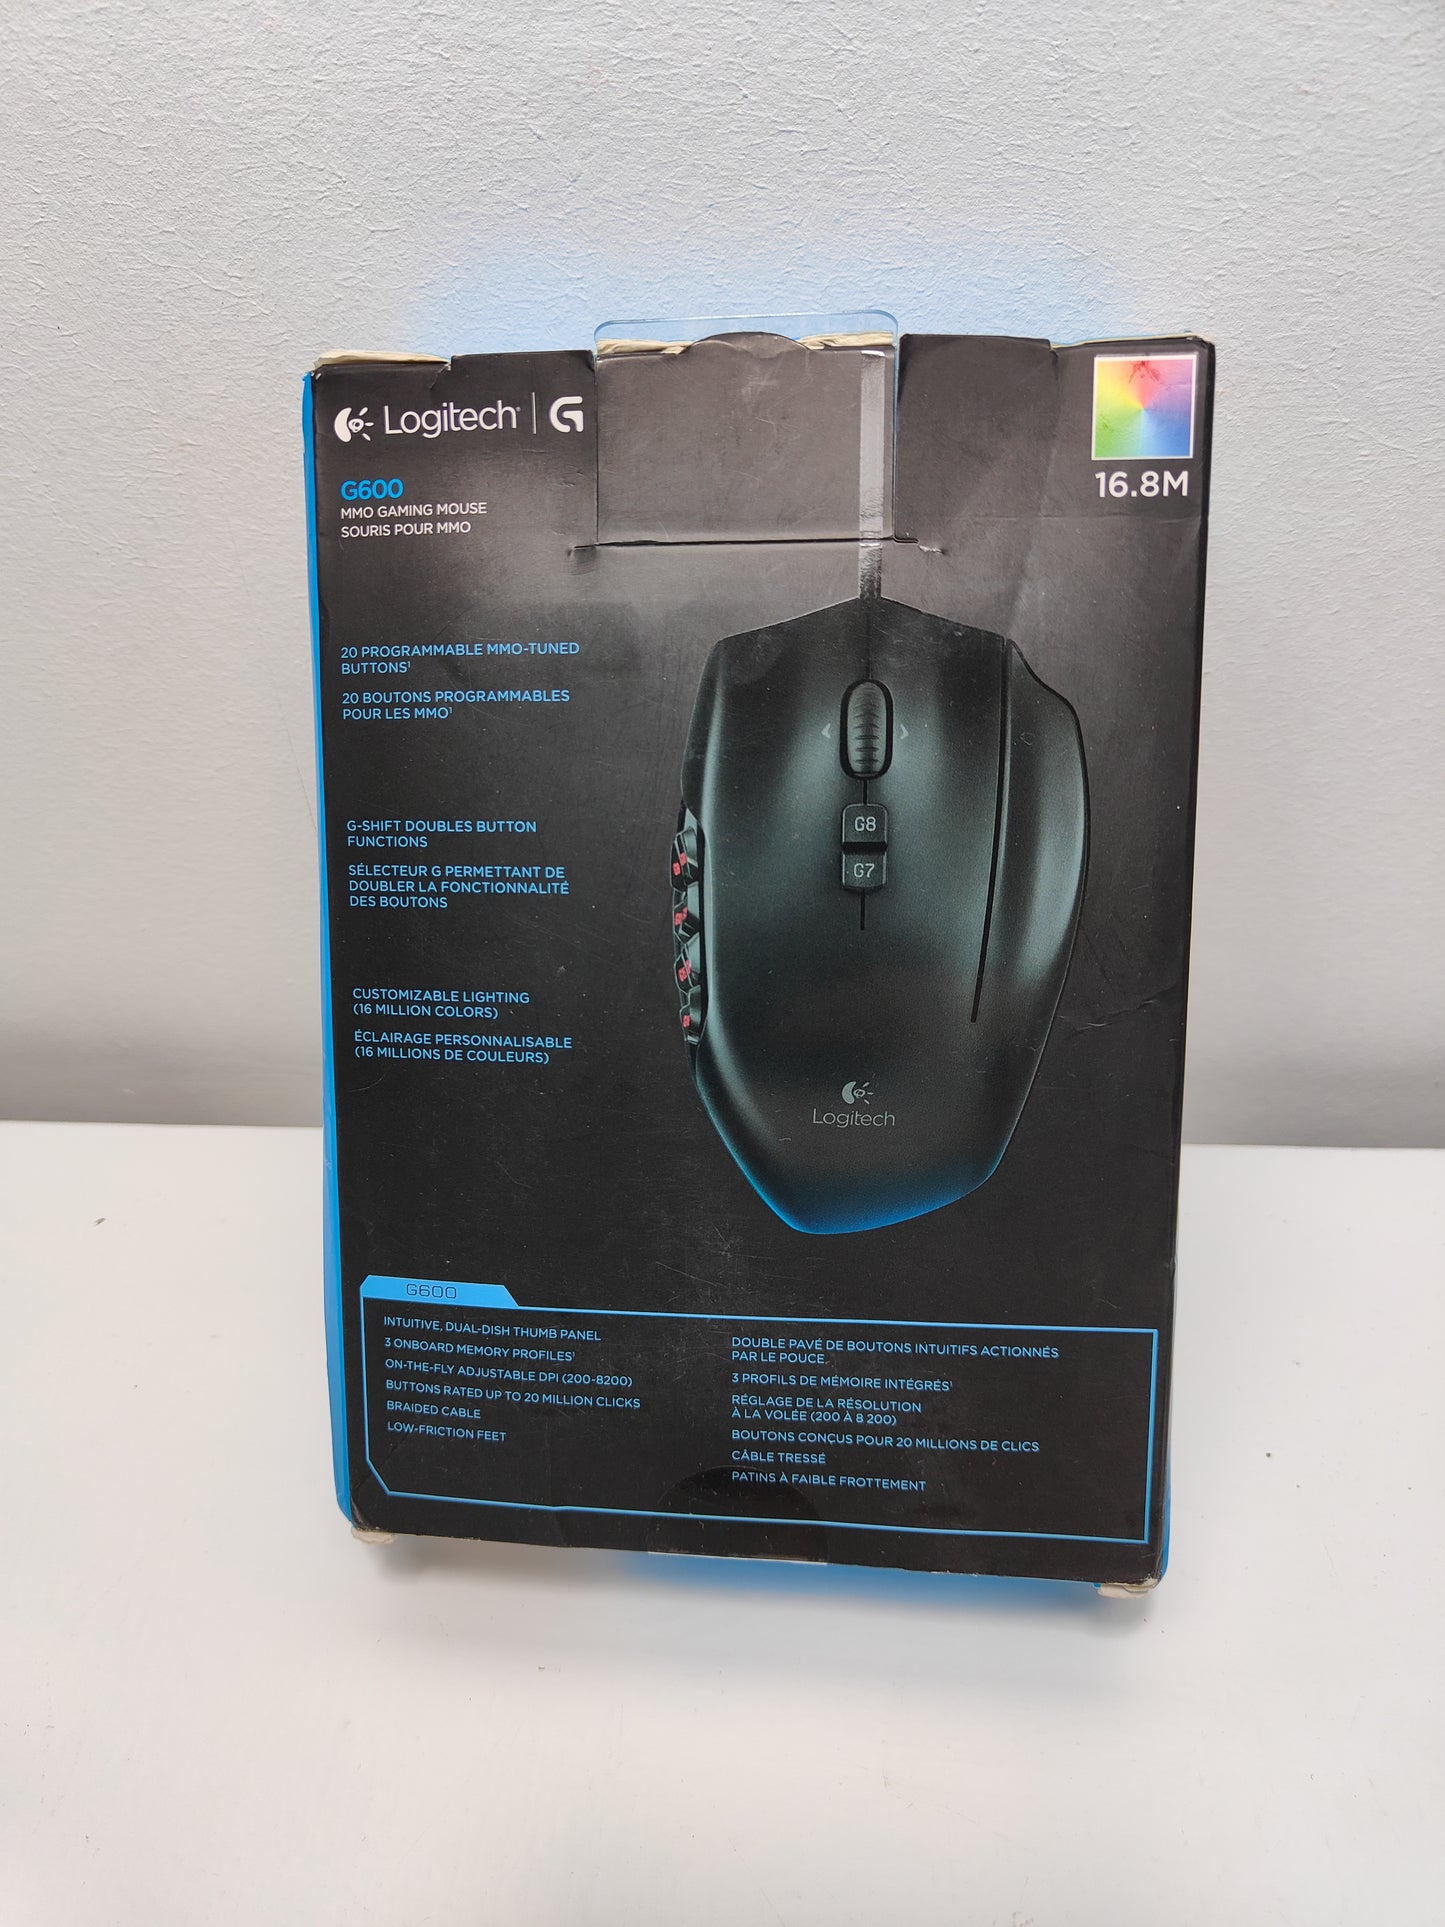 Logitech G600 MMO USB Gaming Mouse in Black